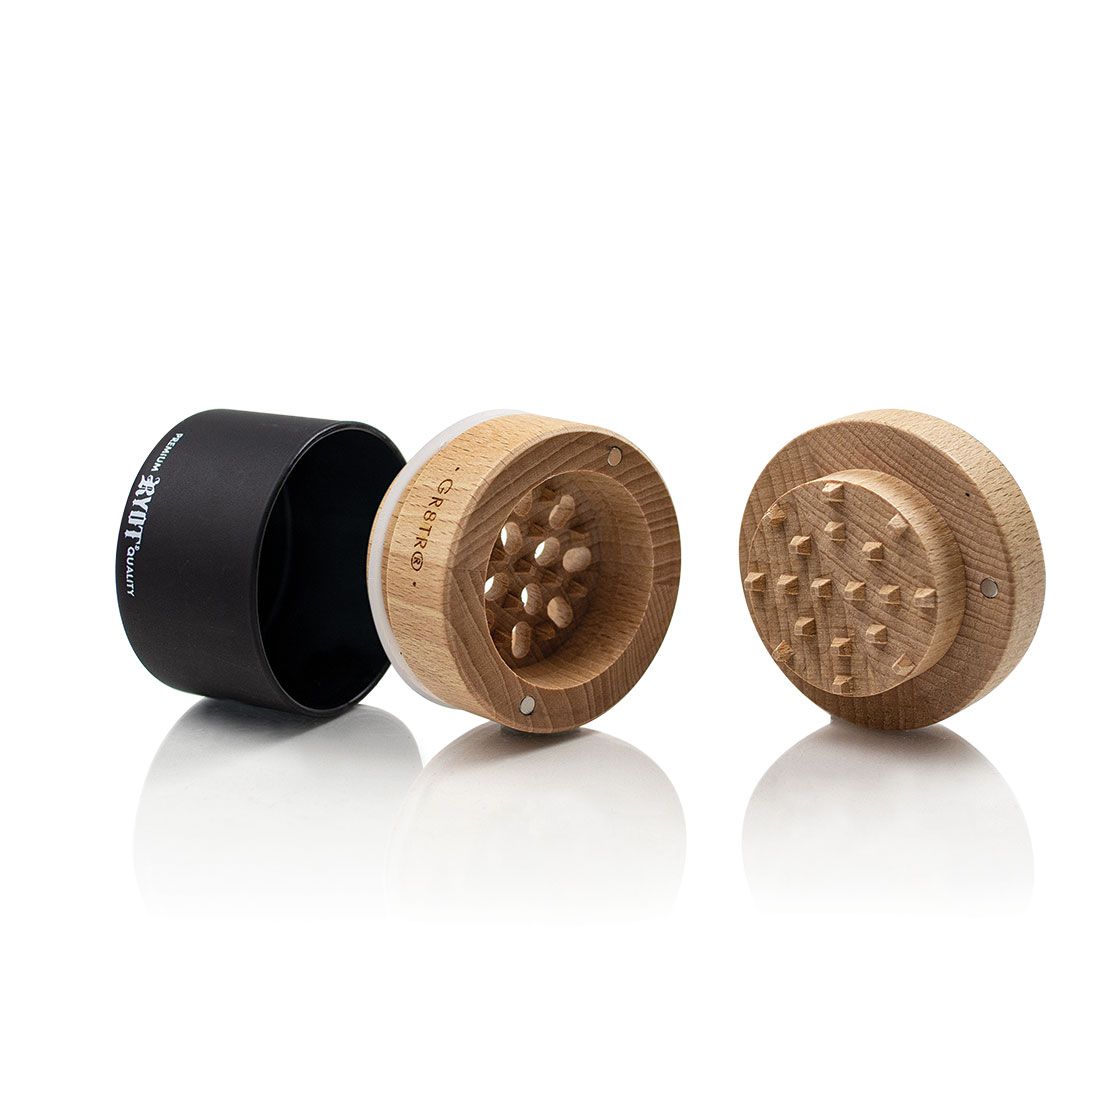 RYOT - Wood GR8TR Grinder with Jar Body - Beech and Black